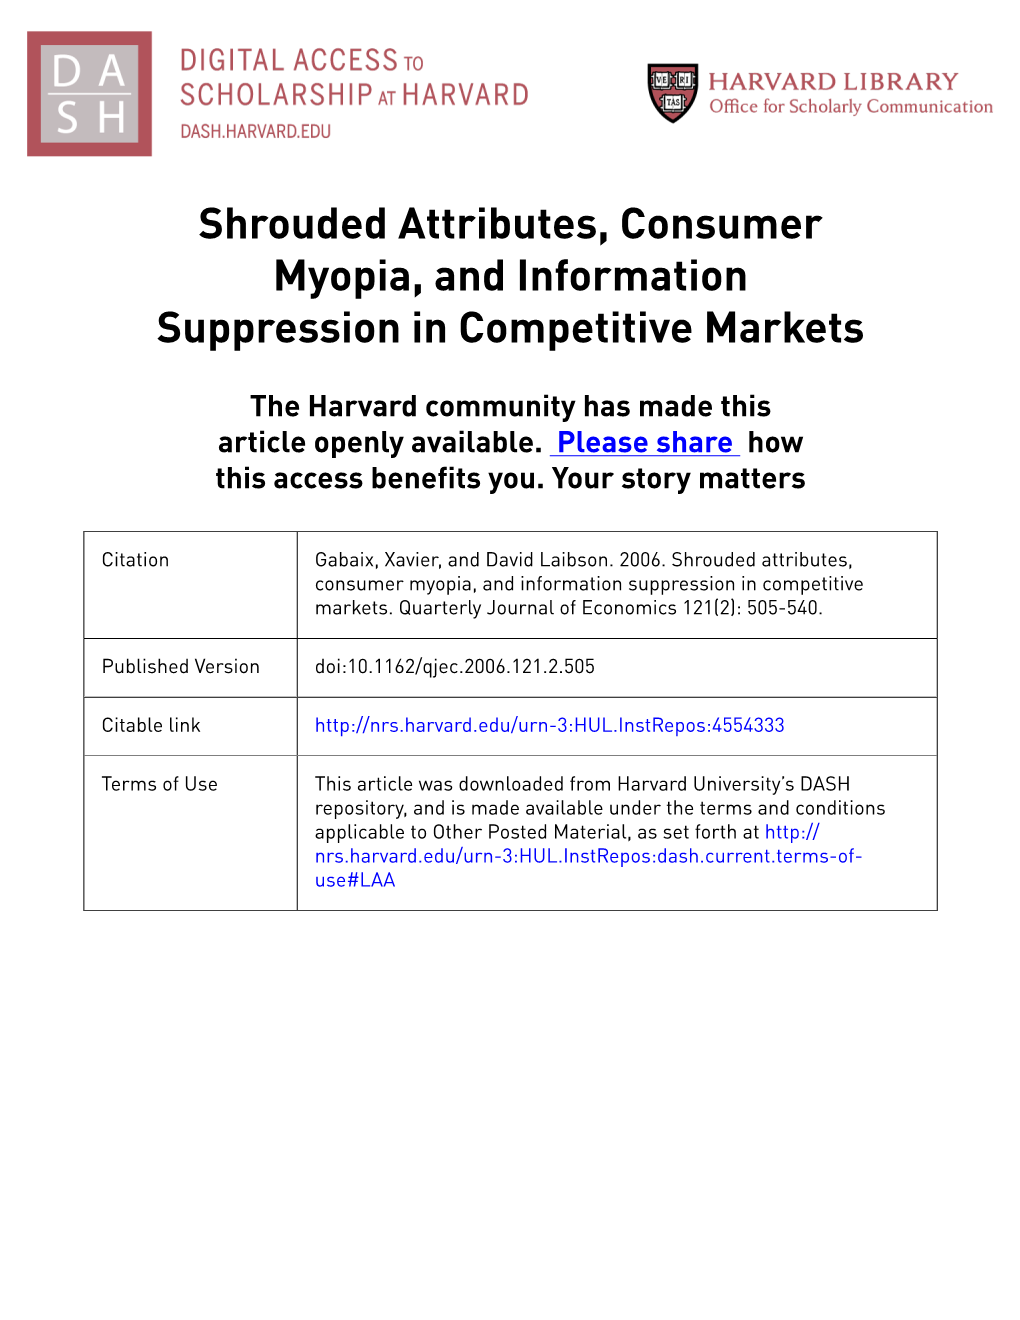 Shrouded Attributes, Consumer Myopia, and Information Suppression in Competitive Markets